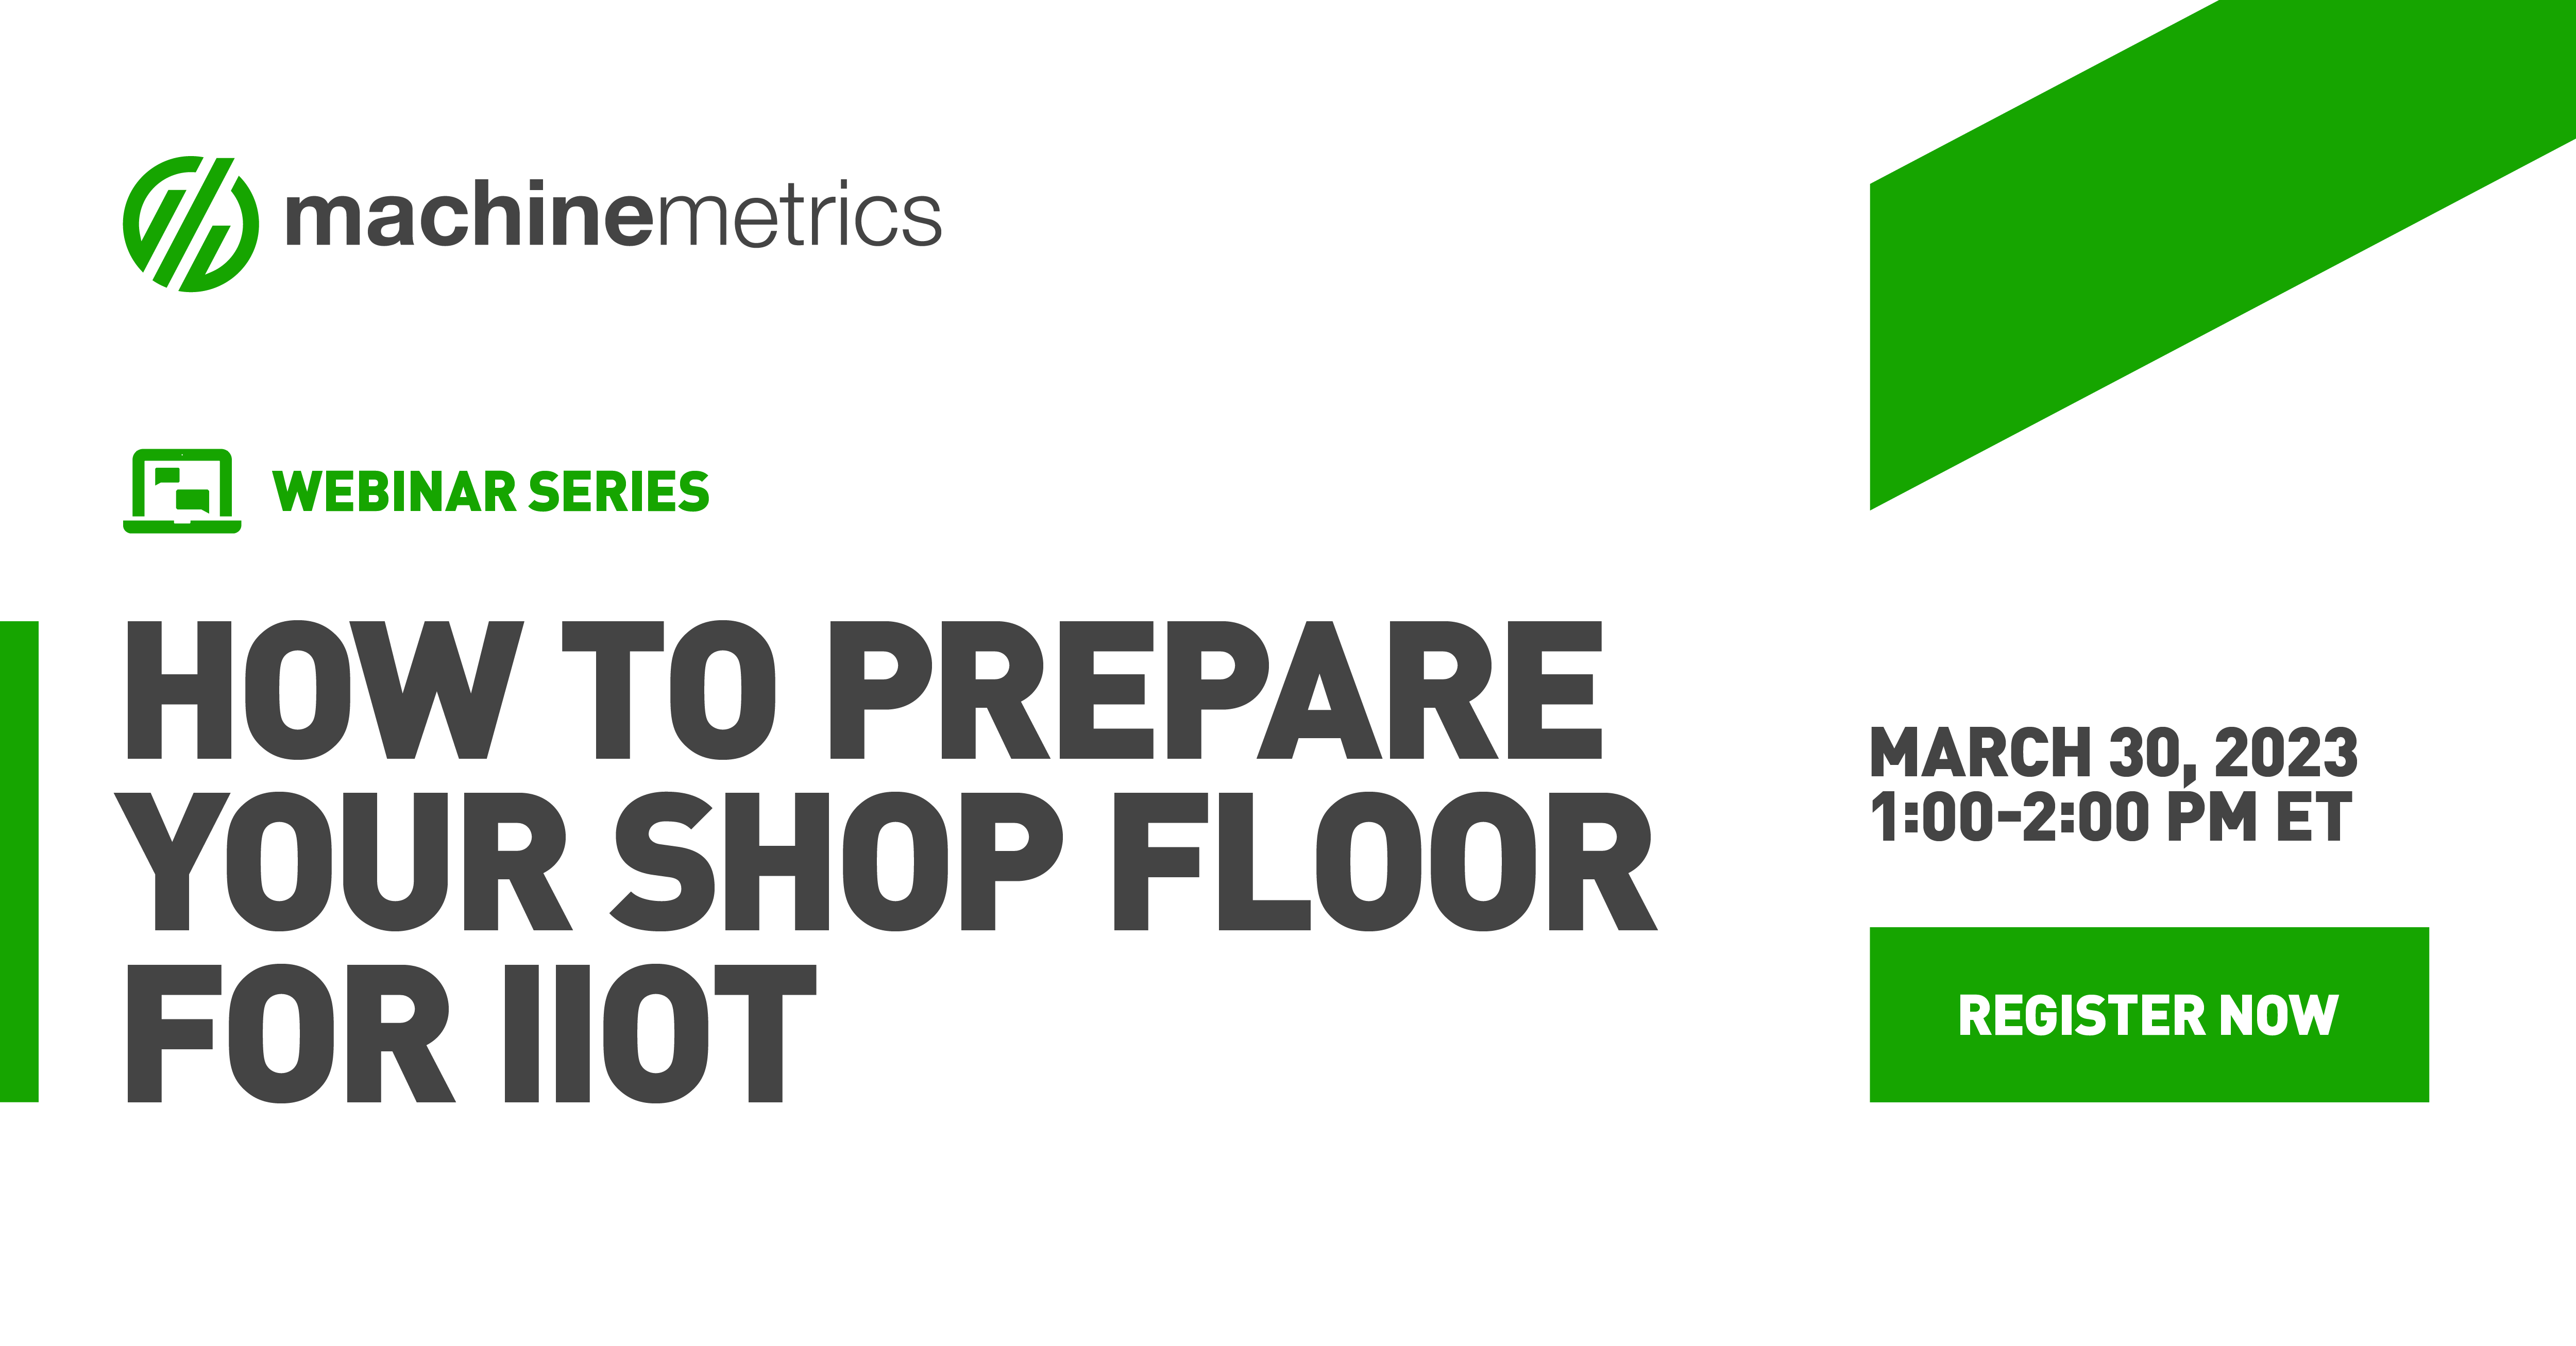 How to Prepare Your Shop Floor Webinar - March 30 at 1pm ET